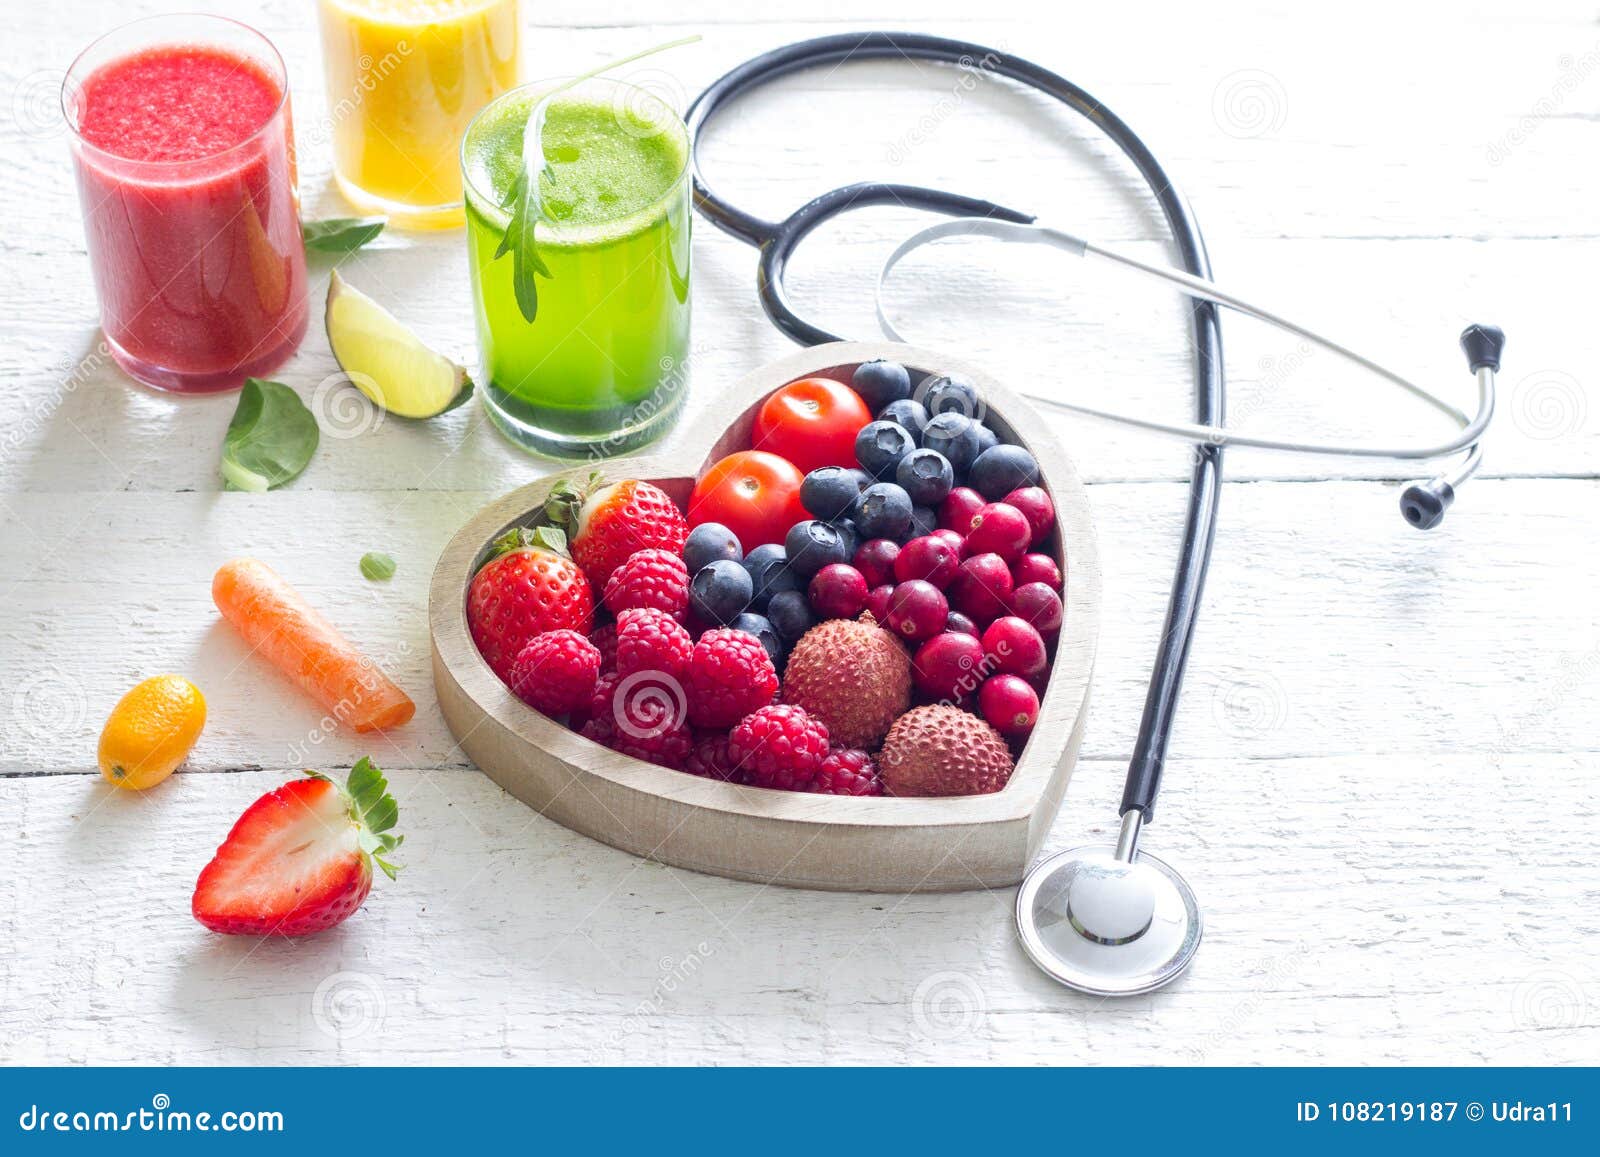 fresh fruits vegetables and heart  with stethoscope health diet concept